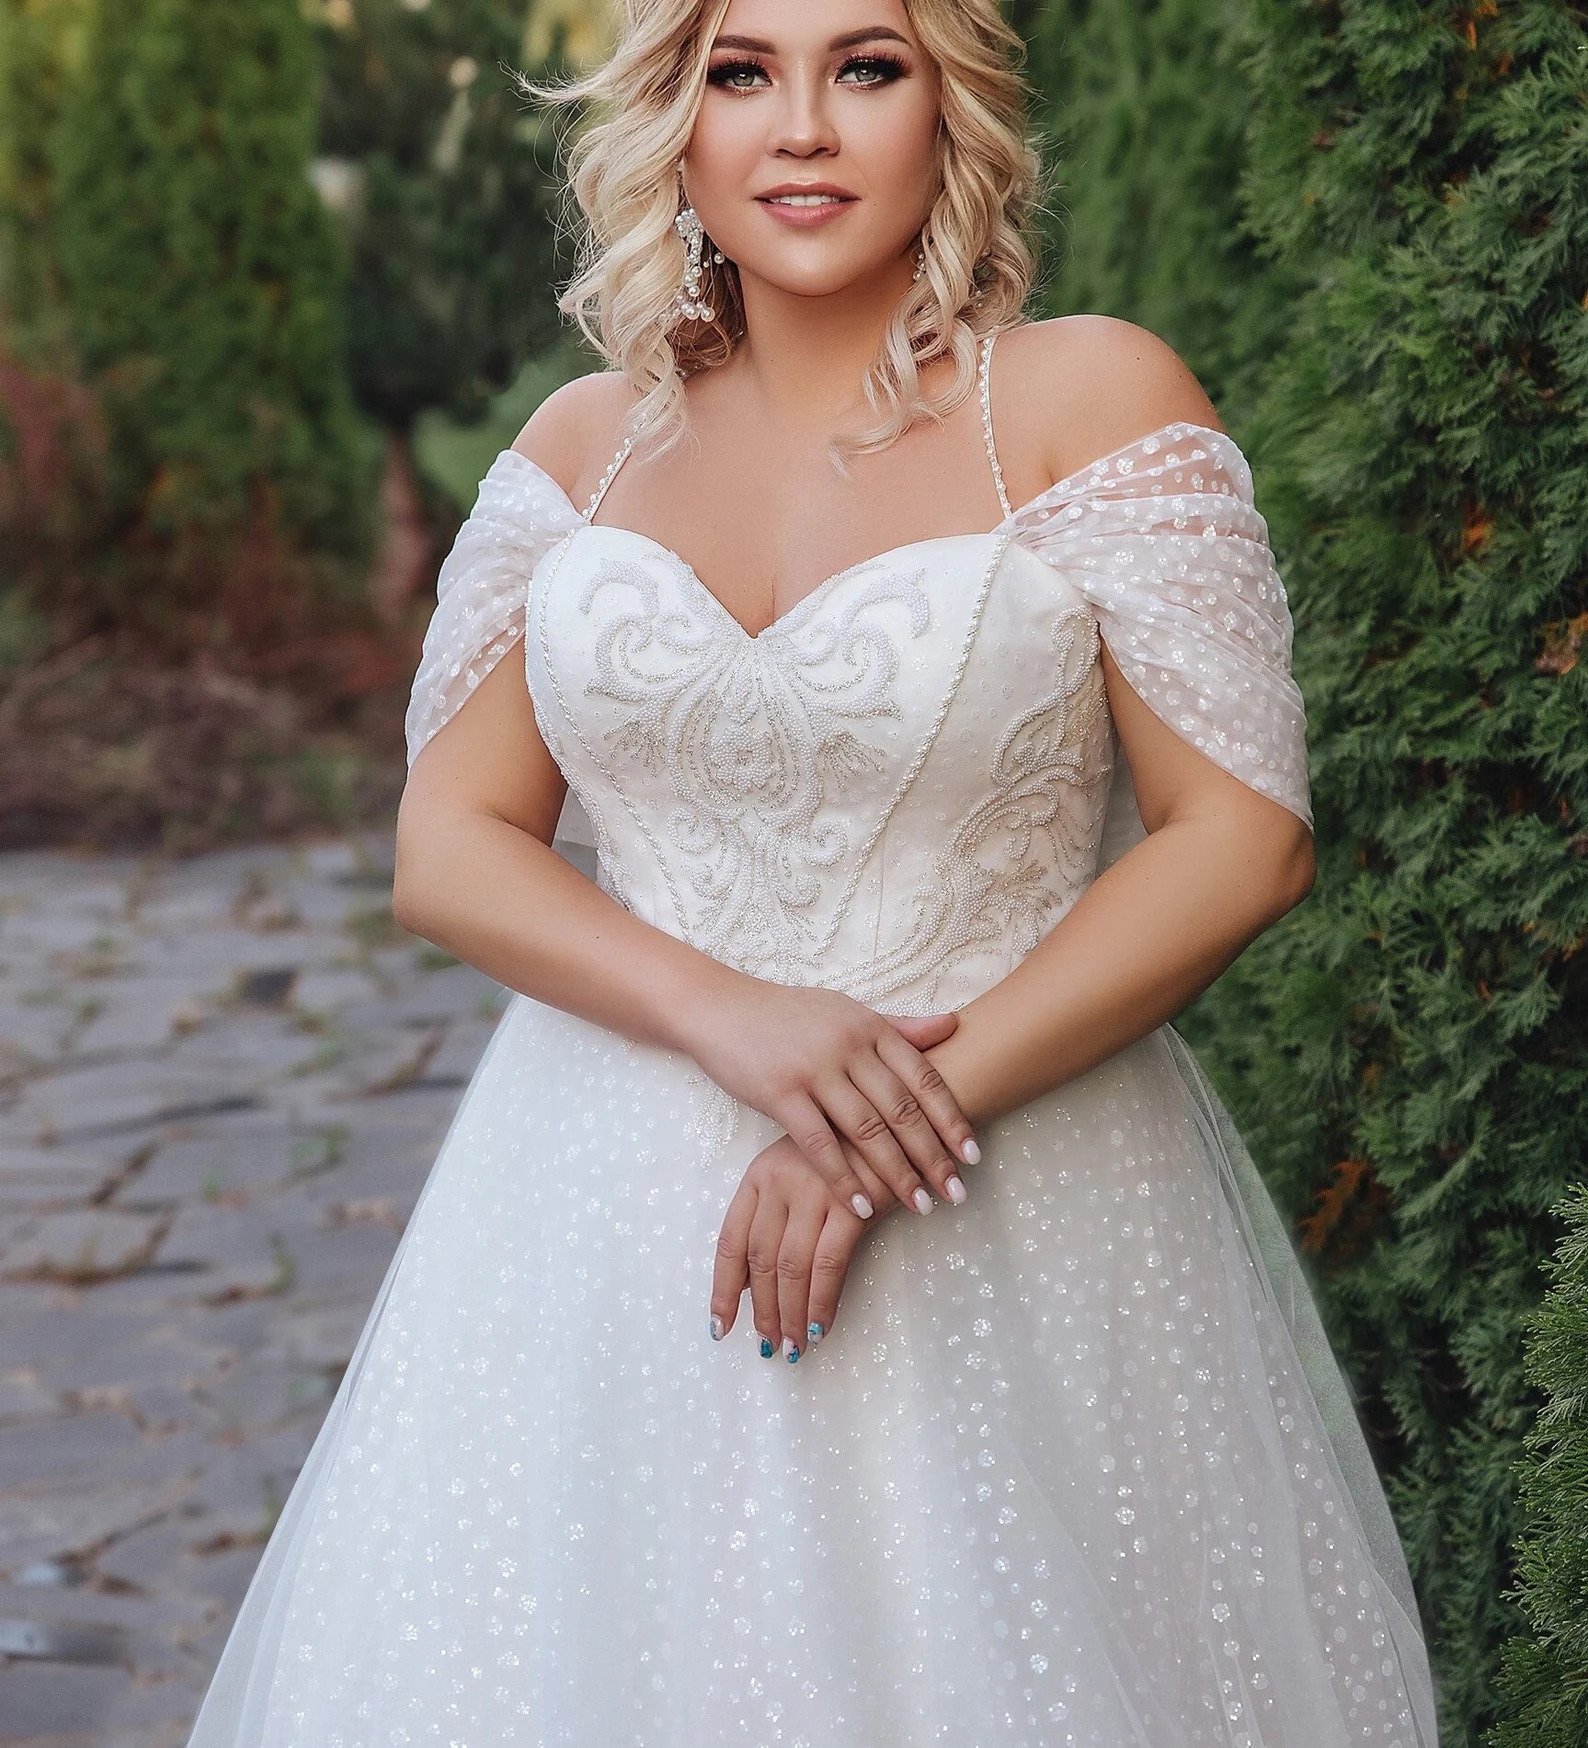 Buying A Wedding Gown For Your Body Shape: Pear | Paloma Blanca